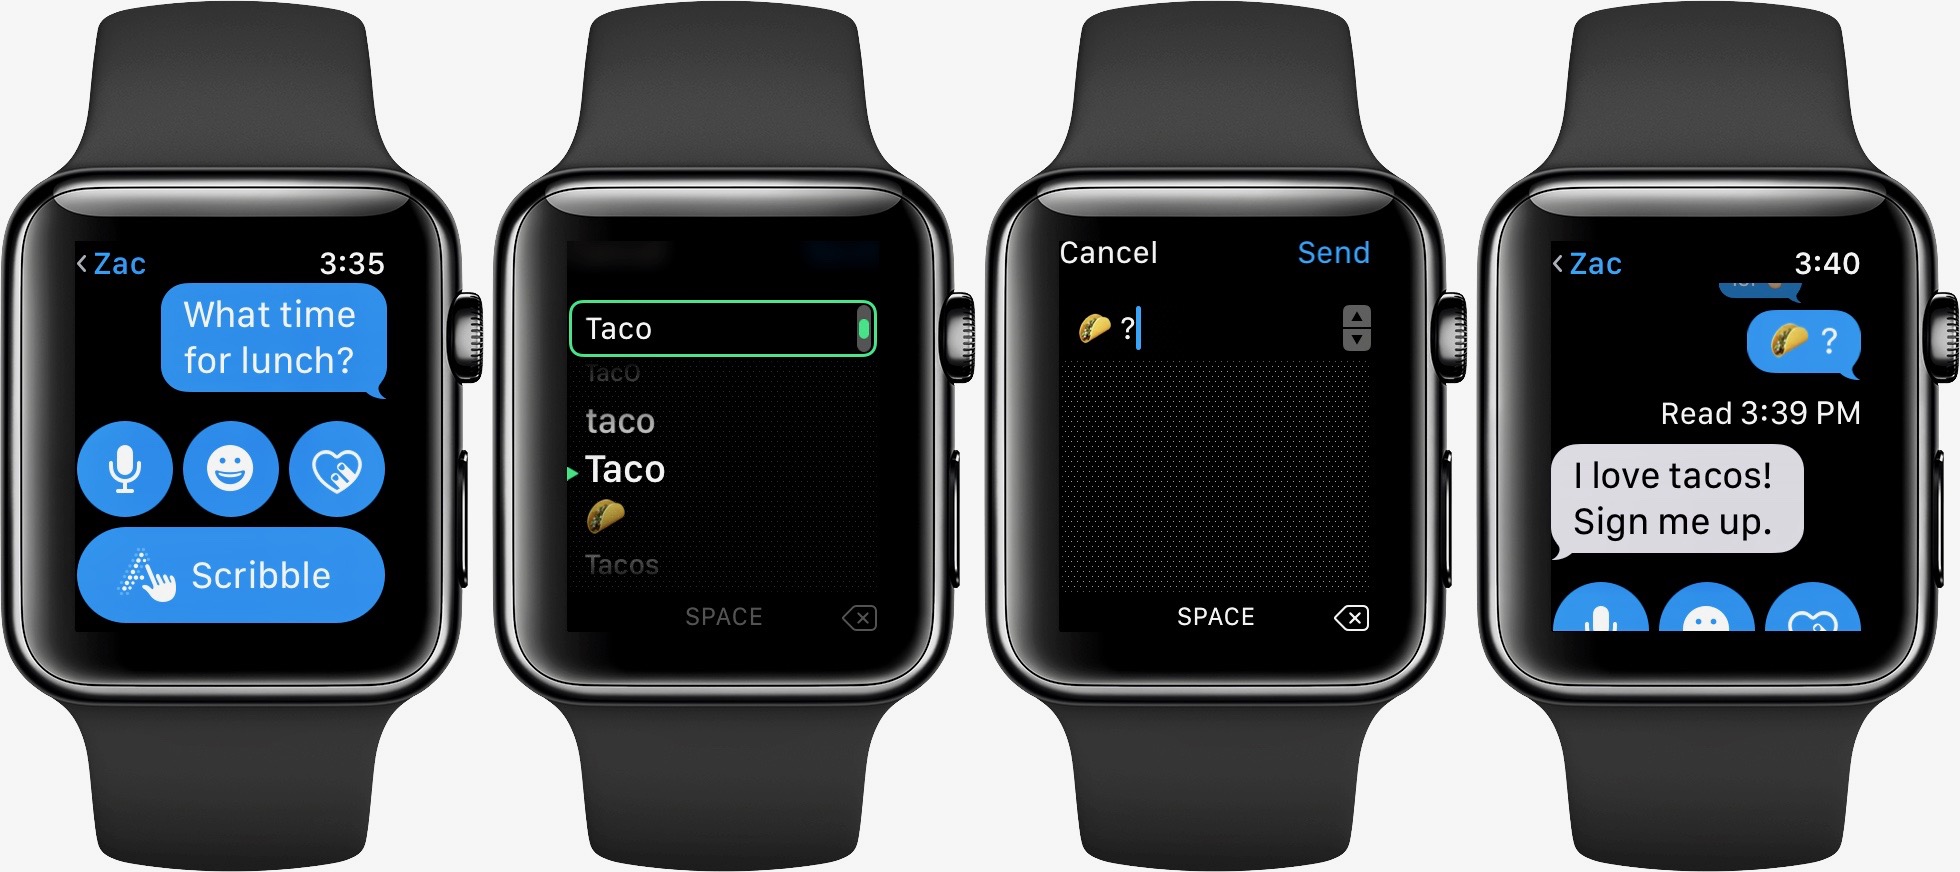 how do i turn on voice to text on my apple watch